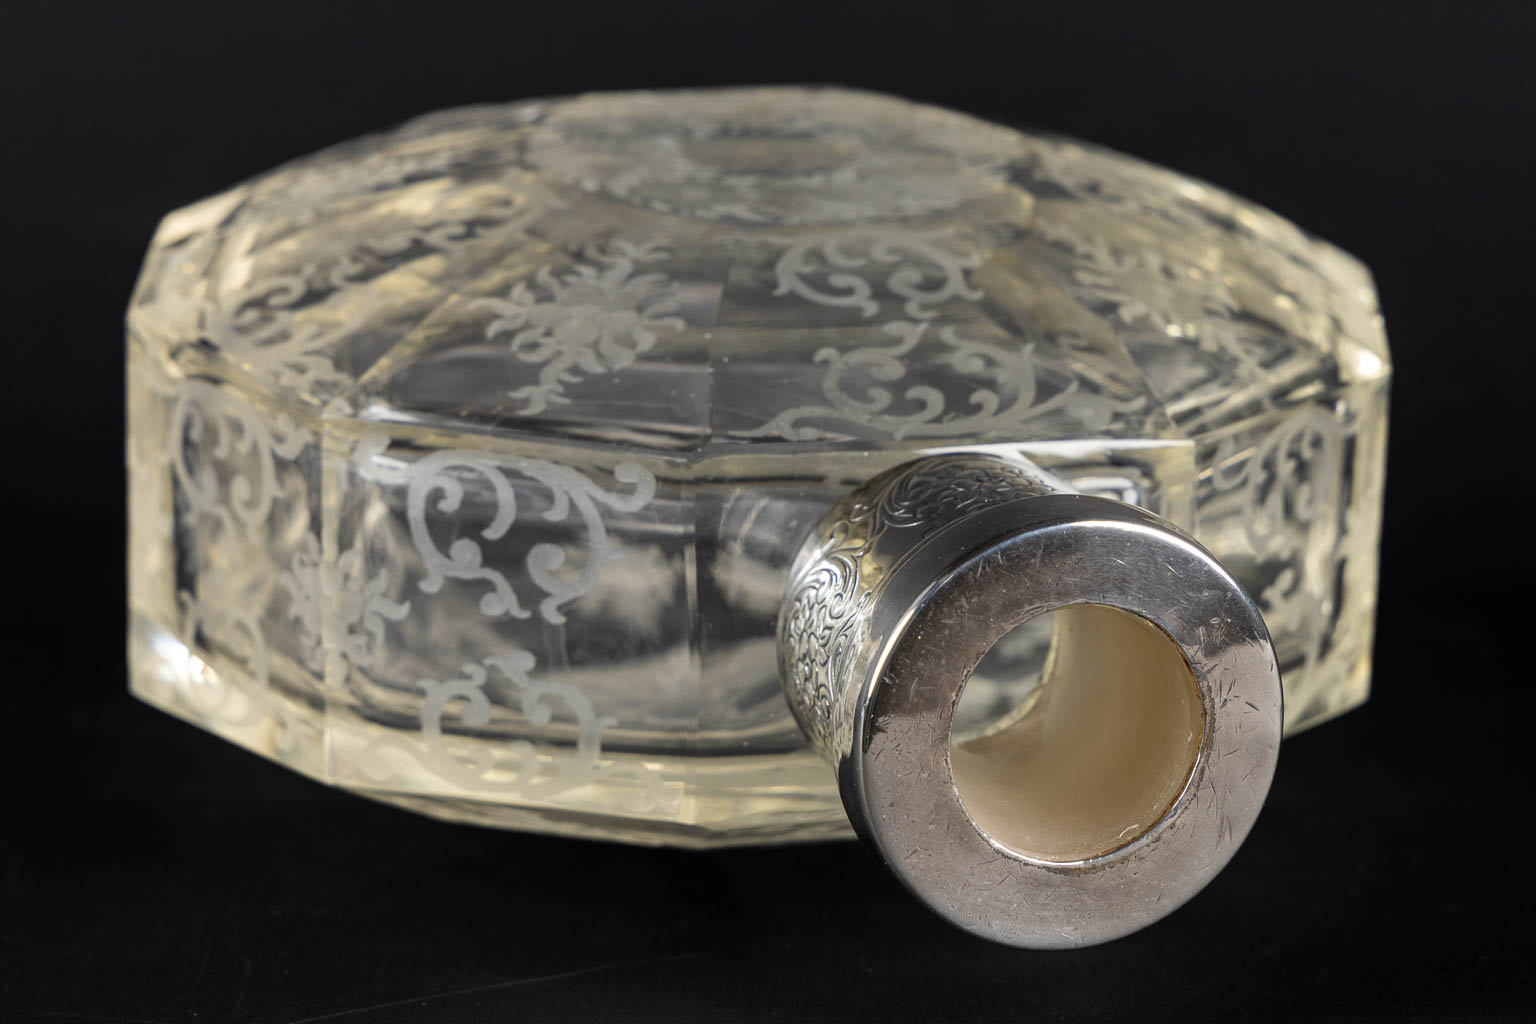 A perfume bottle, etched and mounted with a silver collar, glass. 19th C. (L:8 x W:17 x H:26,5 cm)